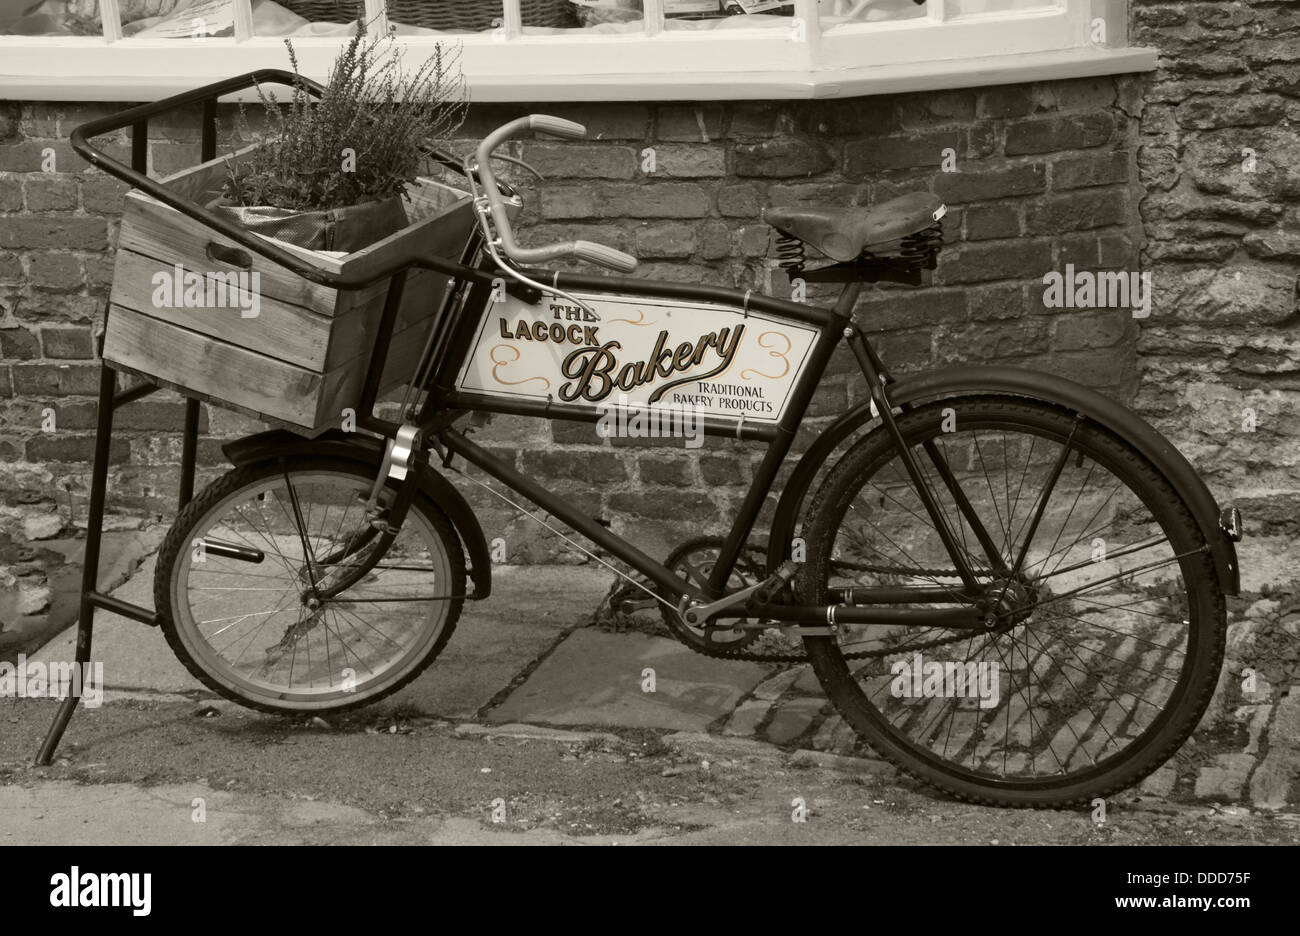 The Lacock Bakery delivery bike, Lacock village, Wiltshire, England, UK Stock Photo